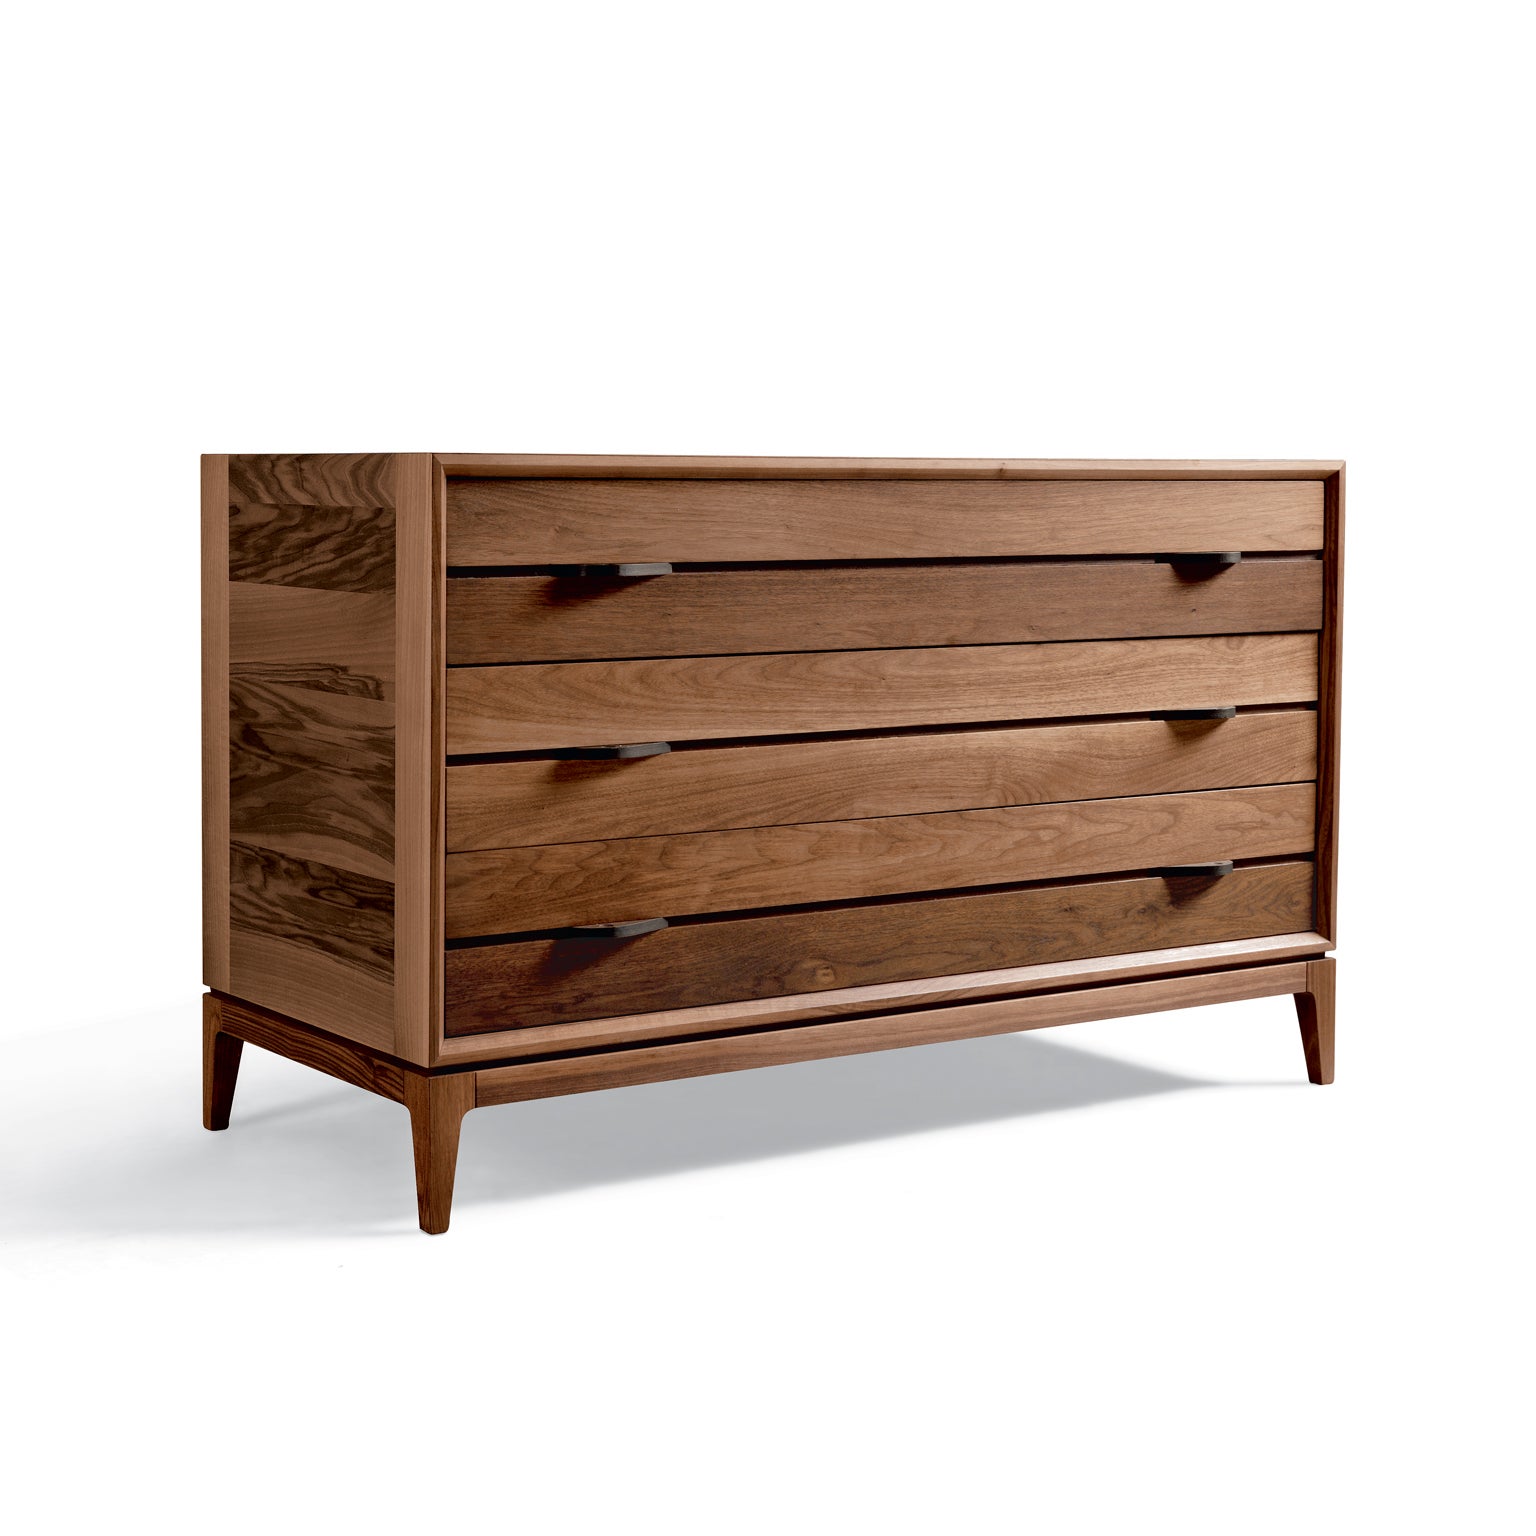 Made in Italy craftmanship shines through the Liliale solid wood dresser. With blockboard structure and slightly inclined drawers, it is made by expert hands from high quality solid walnut with acrylic finish. A modern yet classic design that will